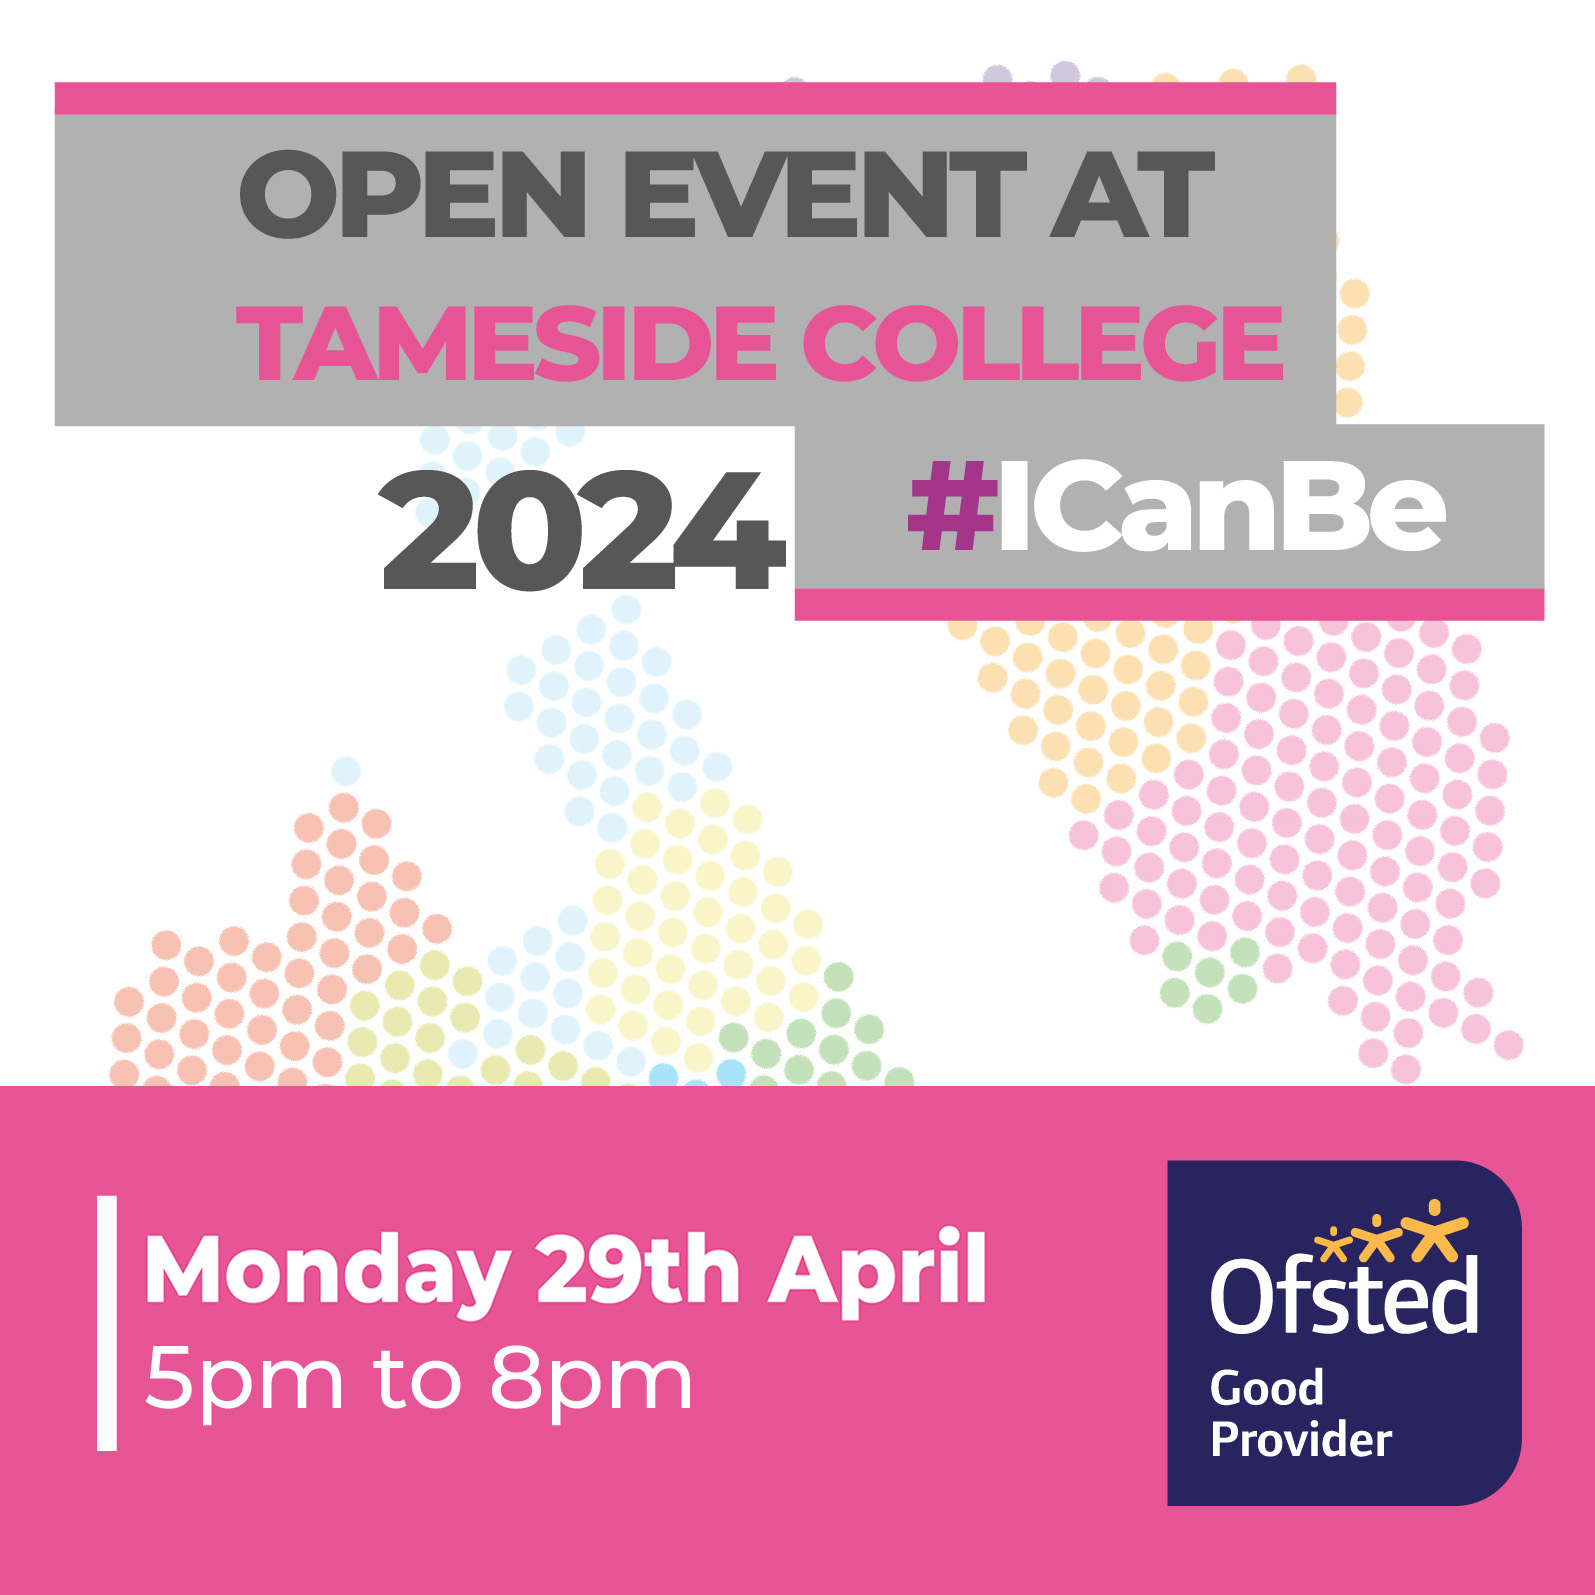 Click to apply to Tameside College. Start your journey here – apply online